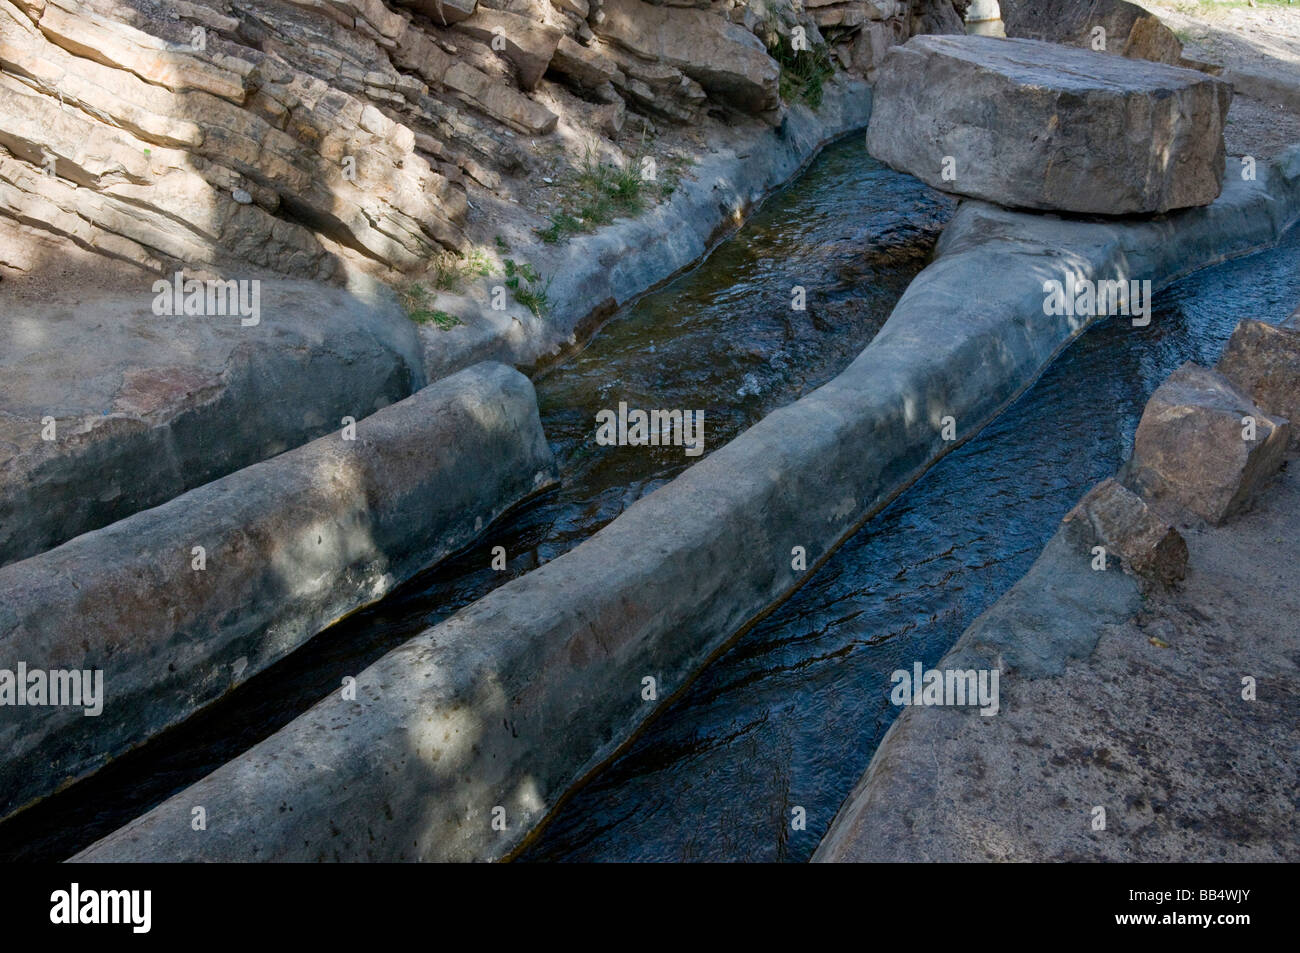 Aflaj or Falaj are traditional water irrigation systems , below are the ones in Jabal el Akhdar in the sultanate of Oman Stock Photo